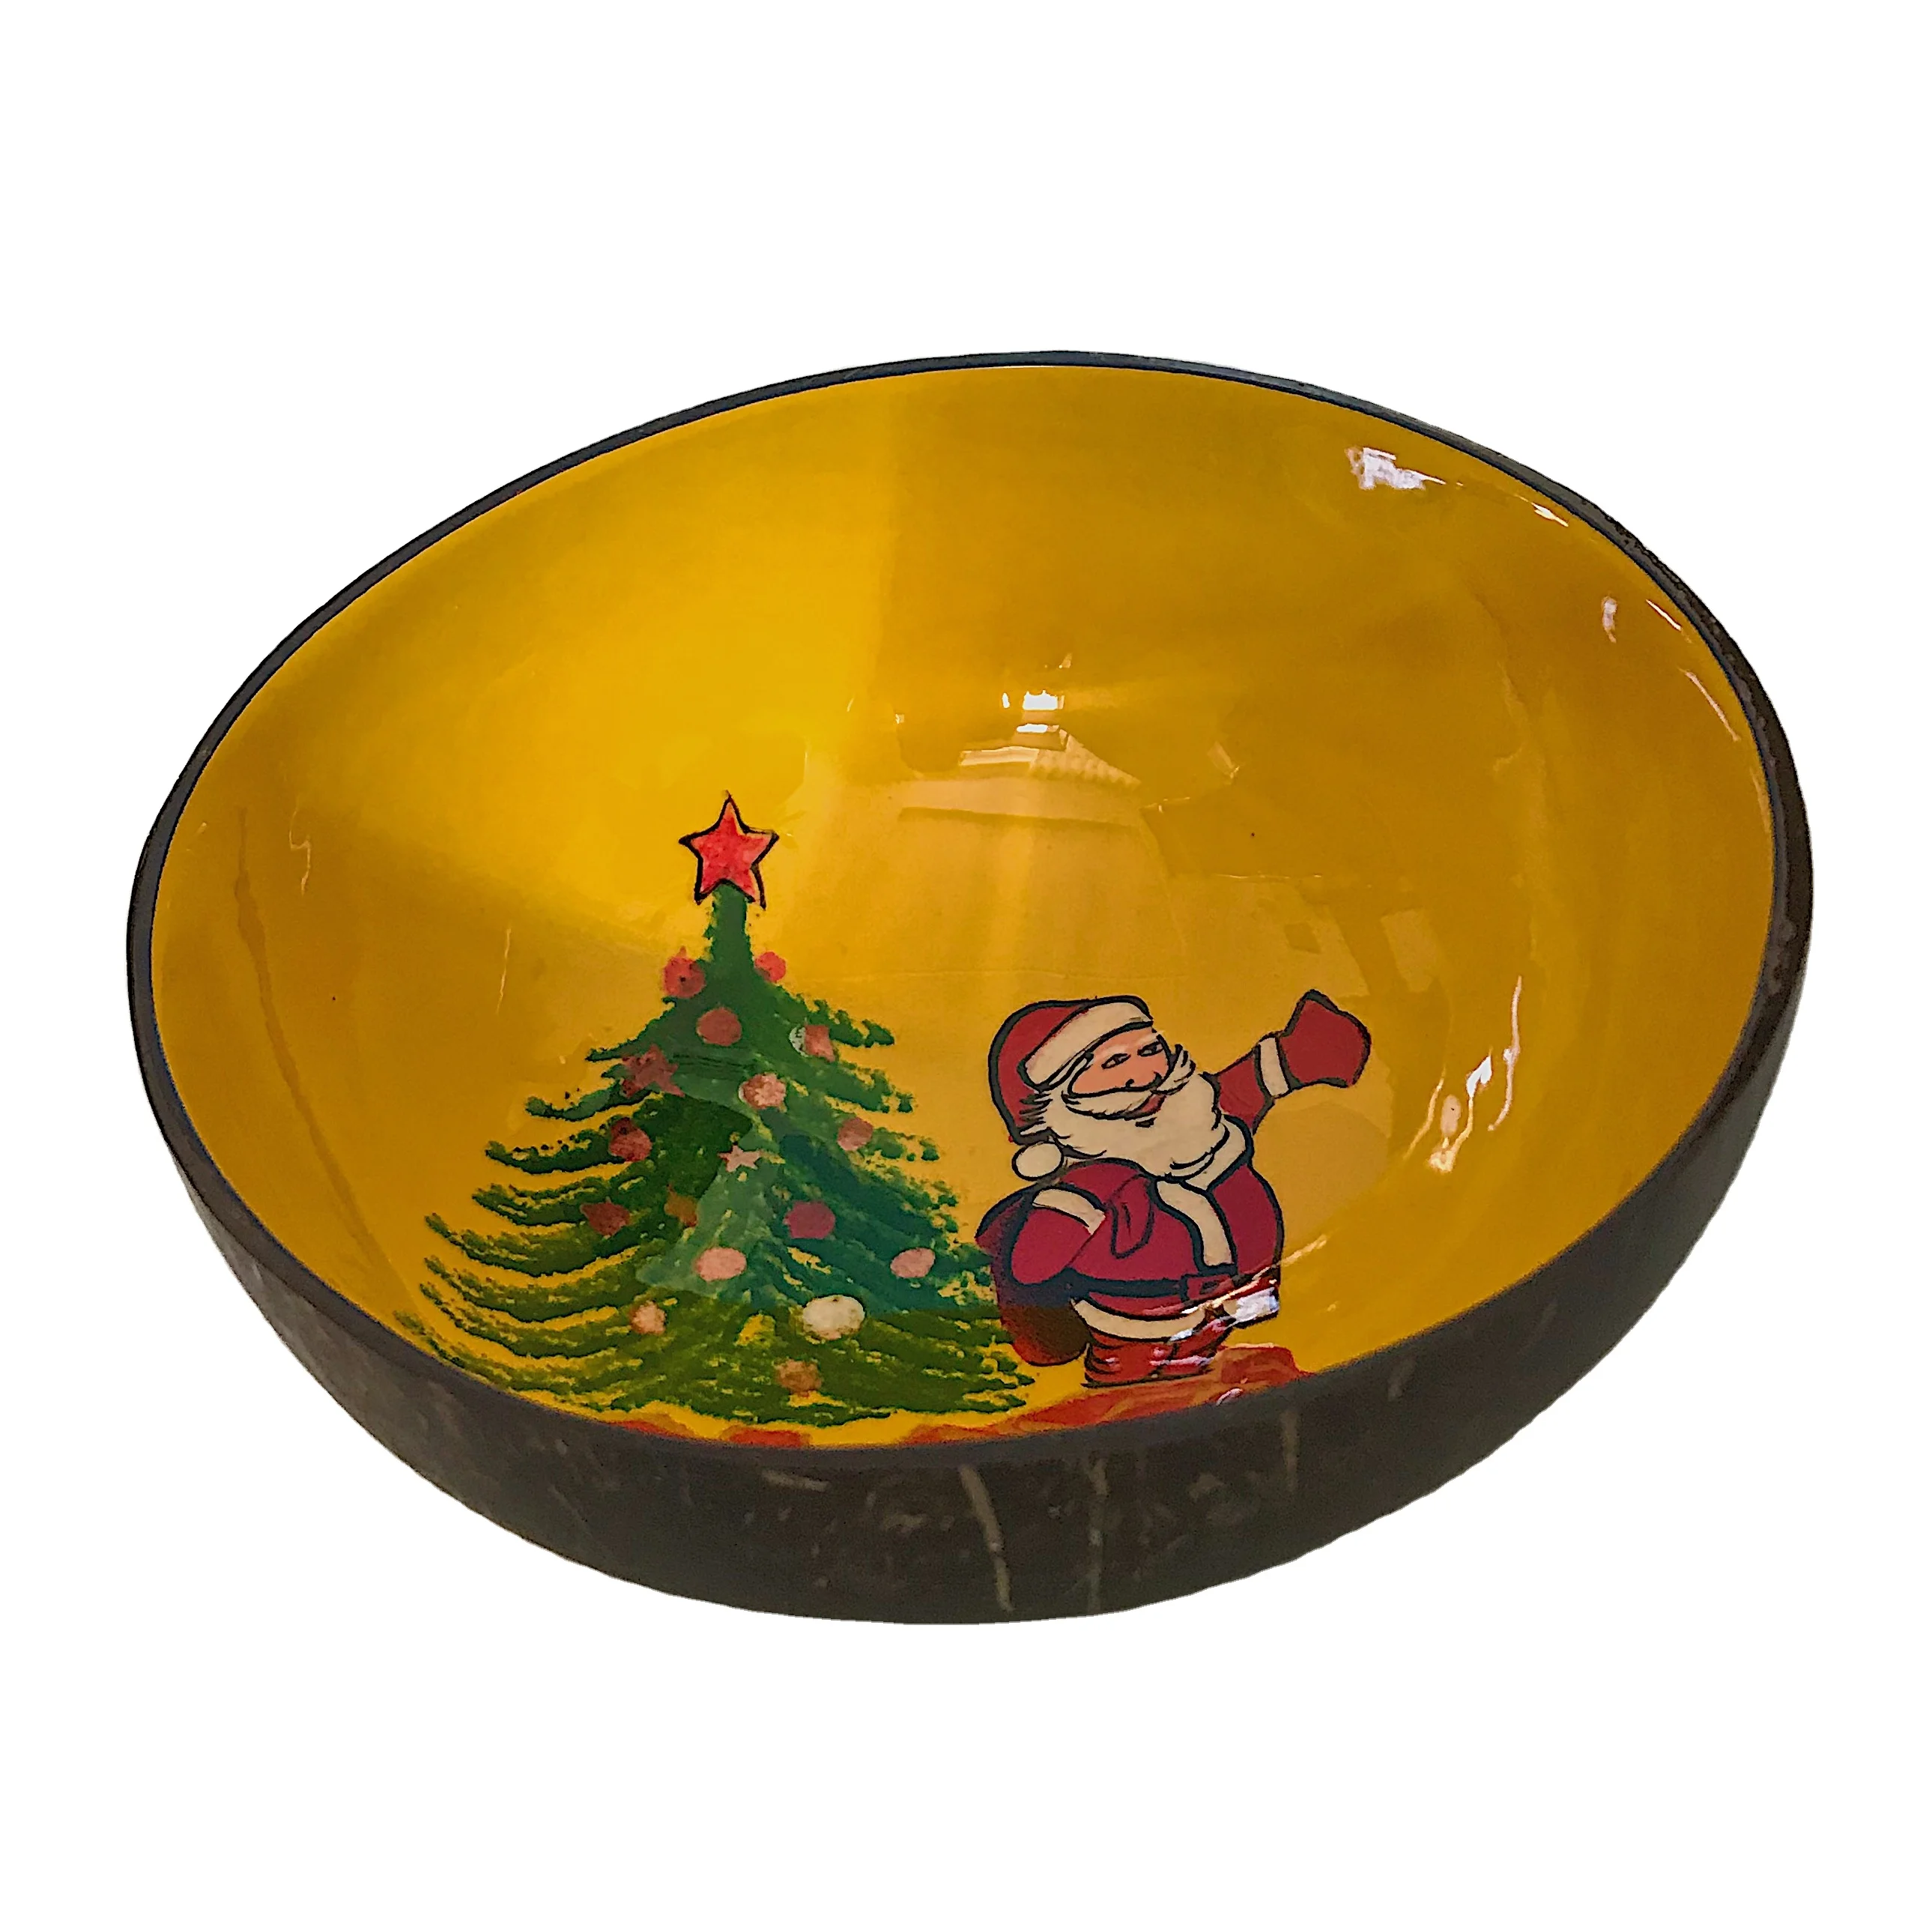 WHOLESALE COLORED LACQUER BOWL FROM COCONUT SHELL MADE IN VIETNAM LACQUERED BOWL AT VERY CHEAP PRICE ACAI BOWL